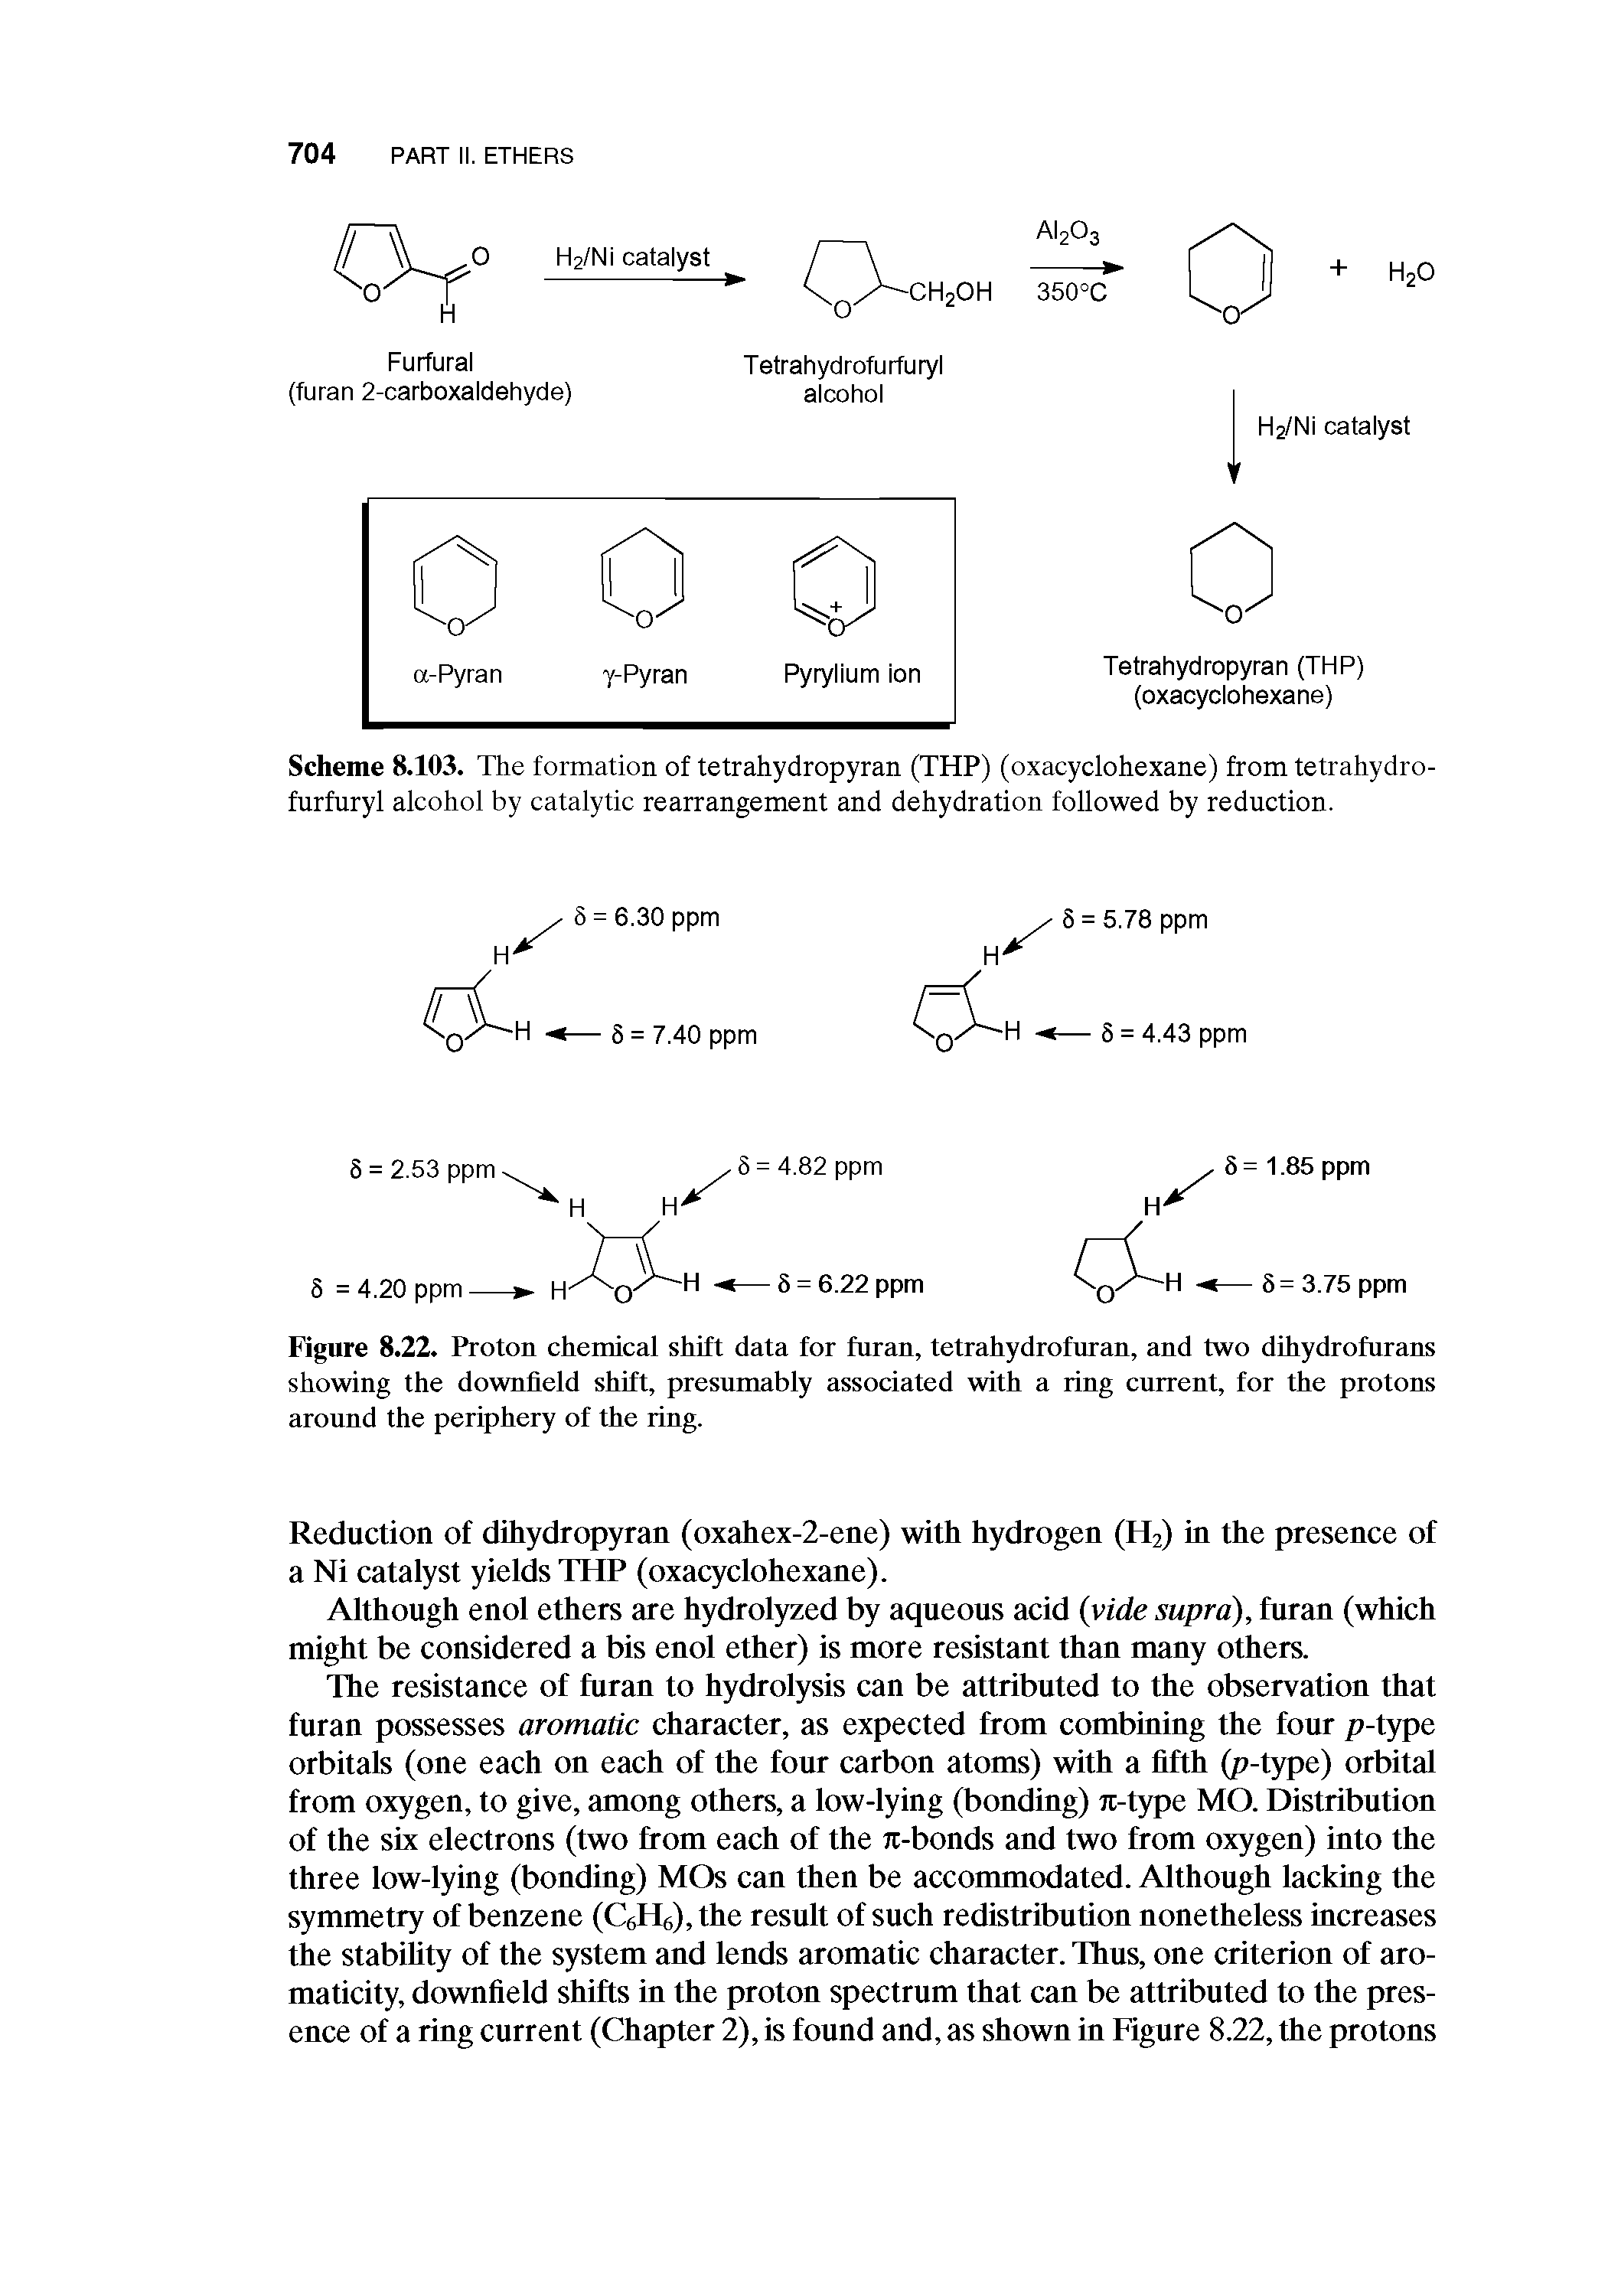 Figure 8.22. Proton chemical shift data for furan, tetrahydrofuran, and two dihydrofurans showing the downfield shift, presnmably associated with a ring current, for the protons aronnd the periphery of the ring.